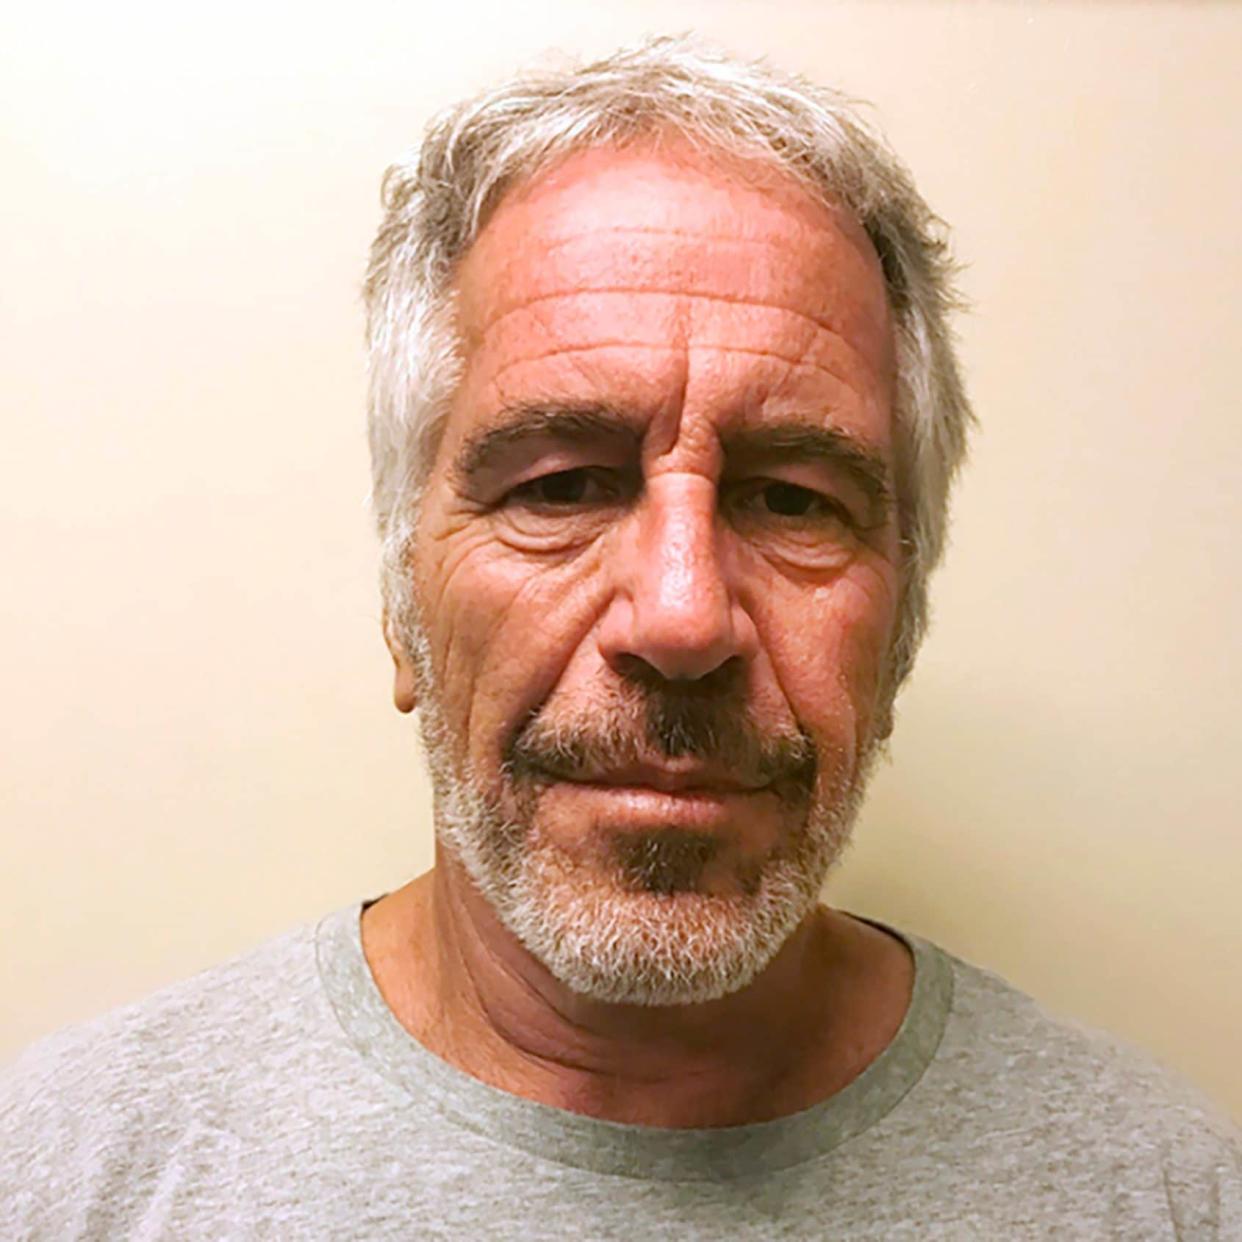 The source of Jeffrey Epstein's wealth his now under investigation. He took his own life in jail on Aug 10 - New York State Sex Offender Registry